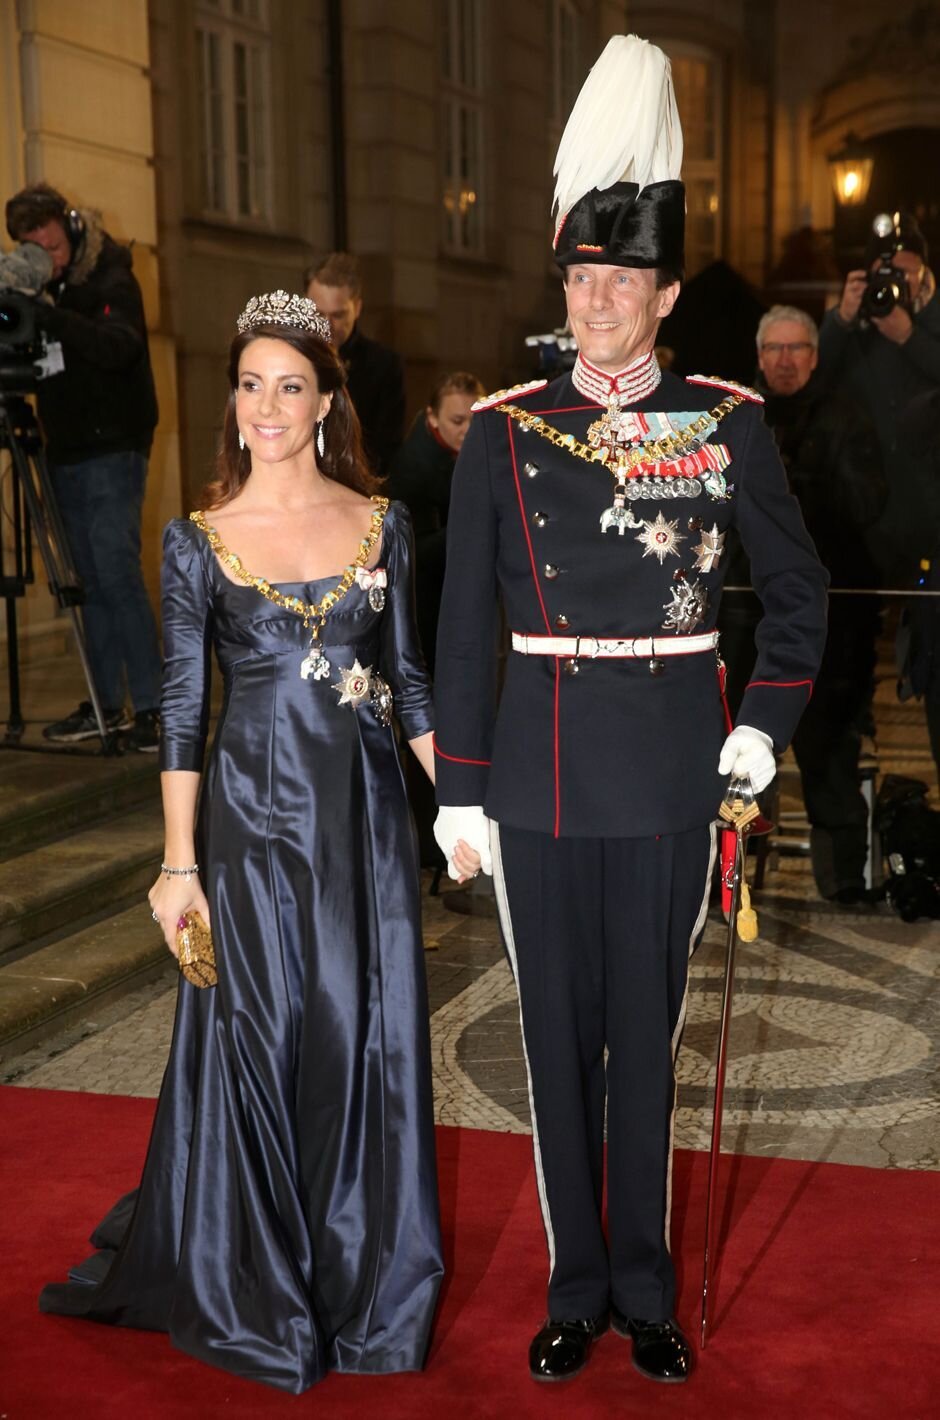 Prince Joachim Princess Marie Attend New Year's Reception 2020 Portraits Gallery